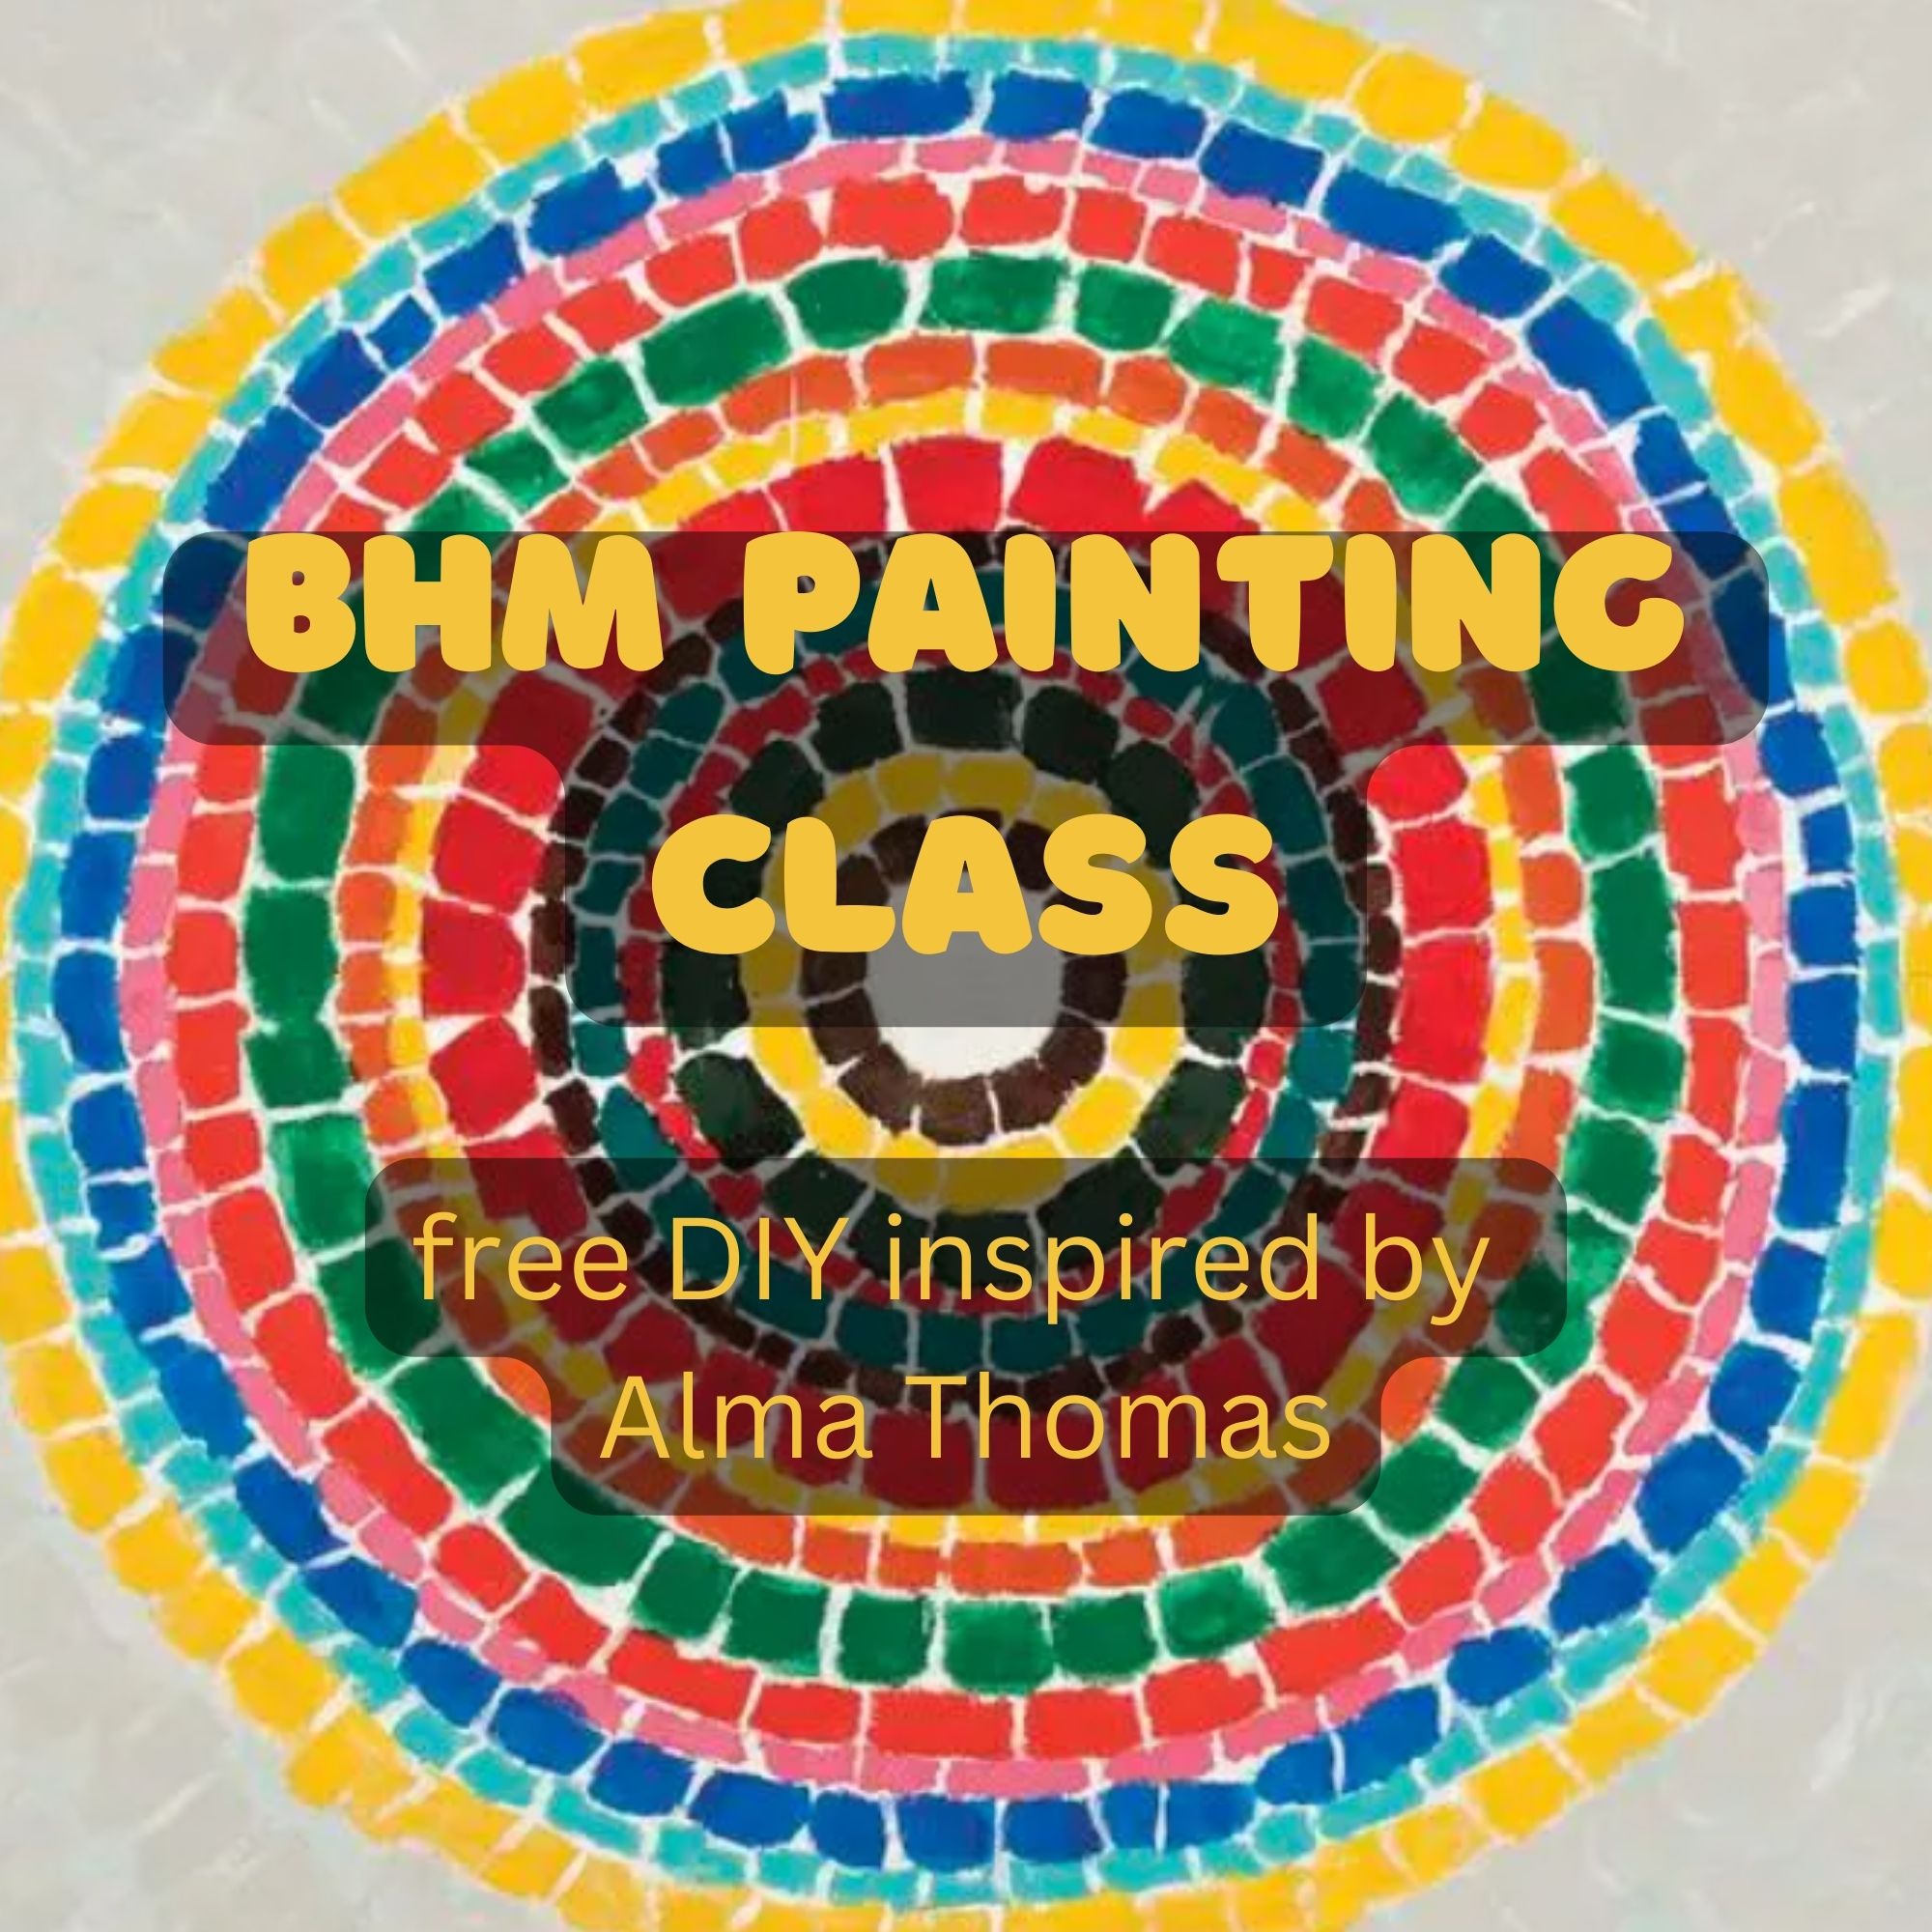 A colorful circle of painted marks outlines text reading: BHM Painting Class